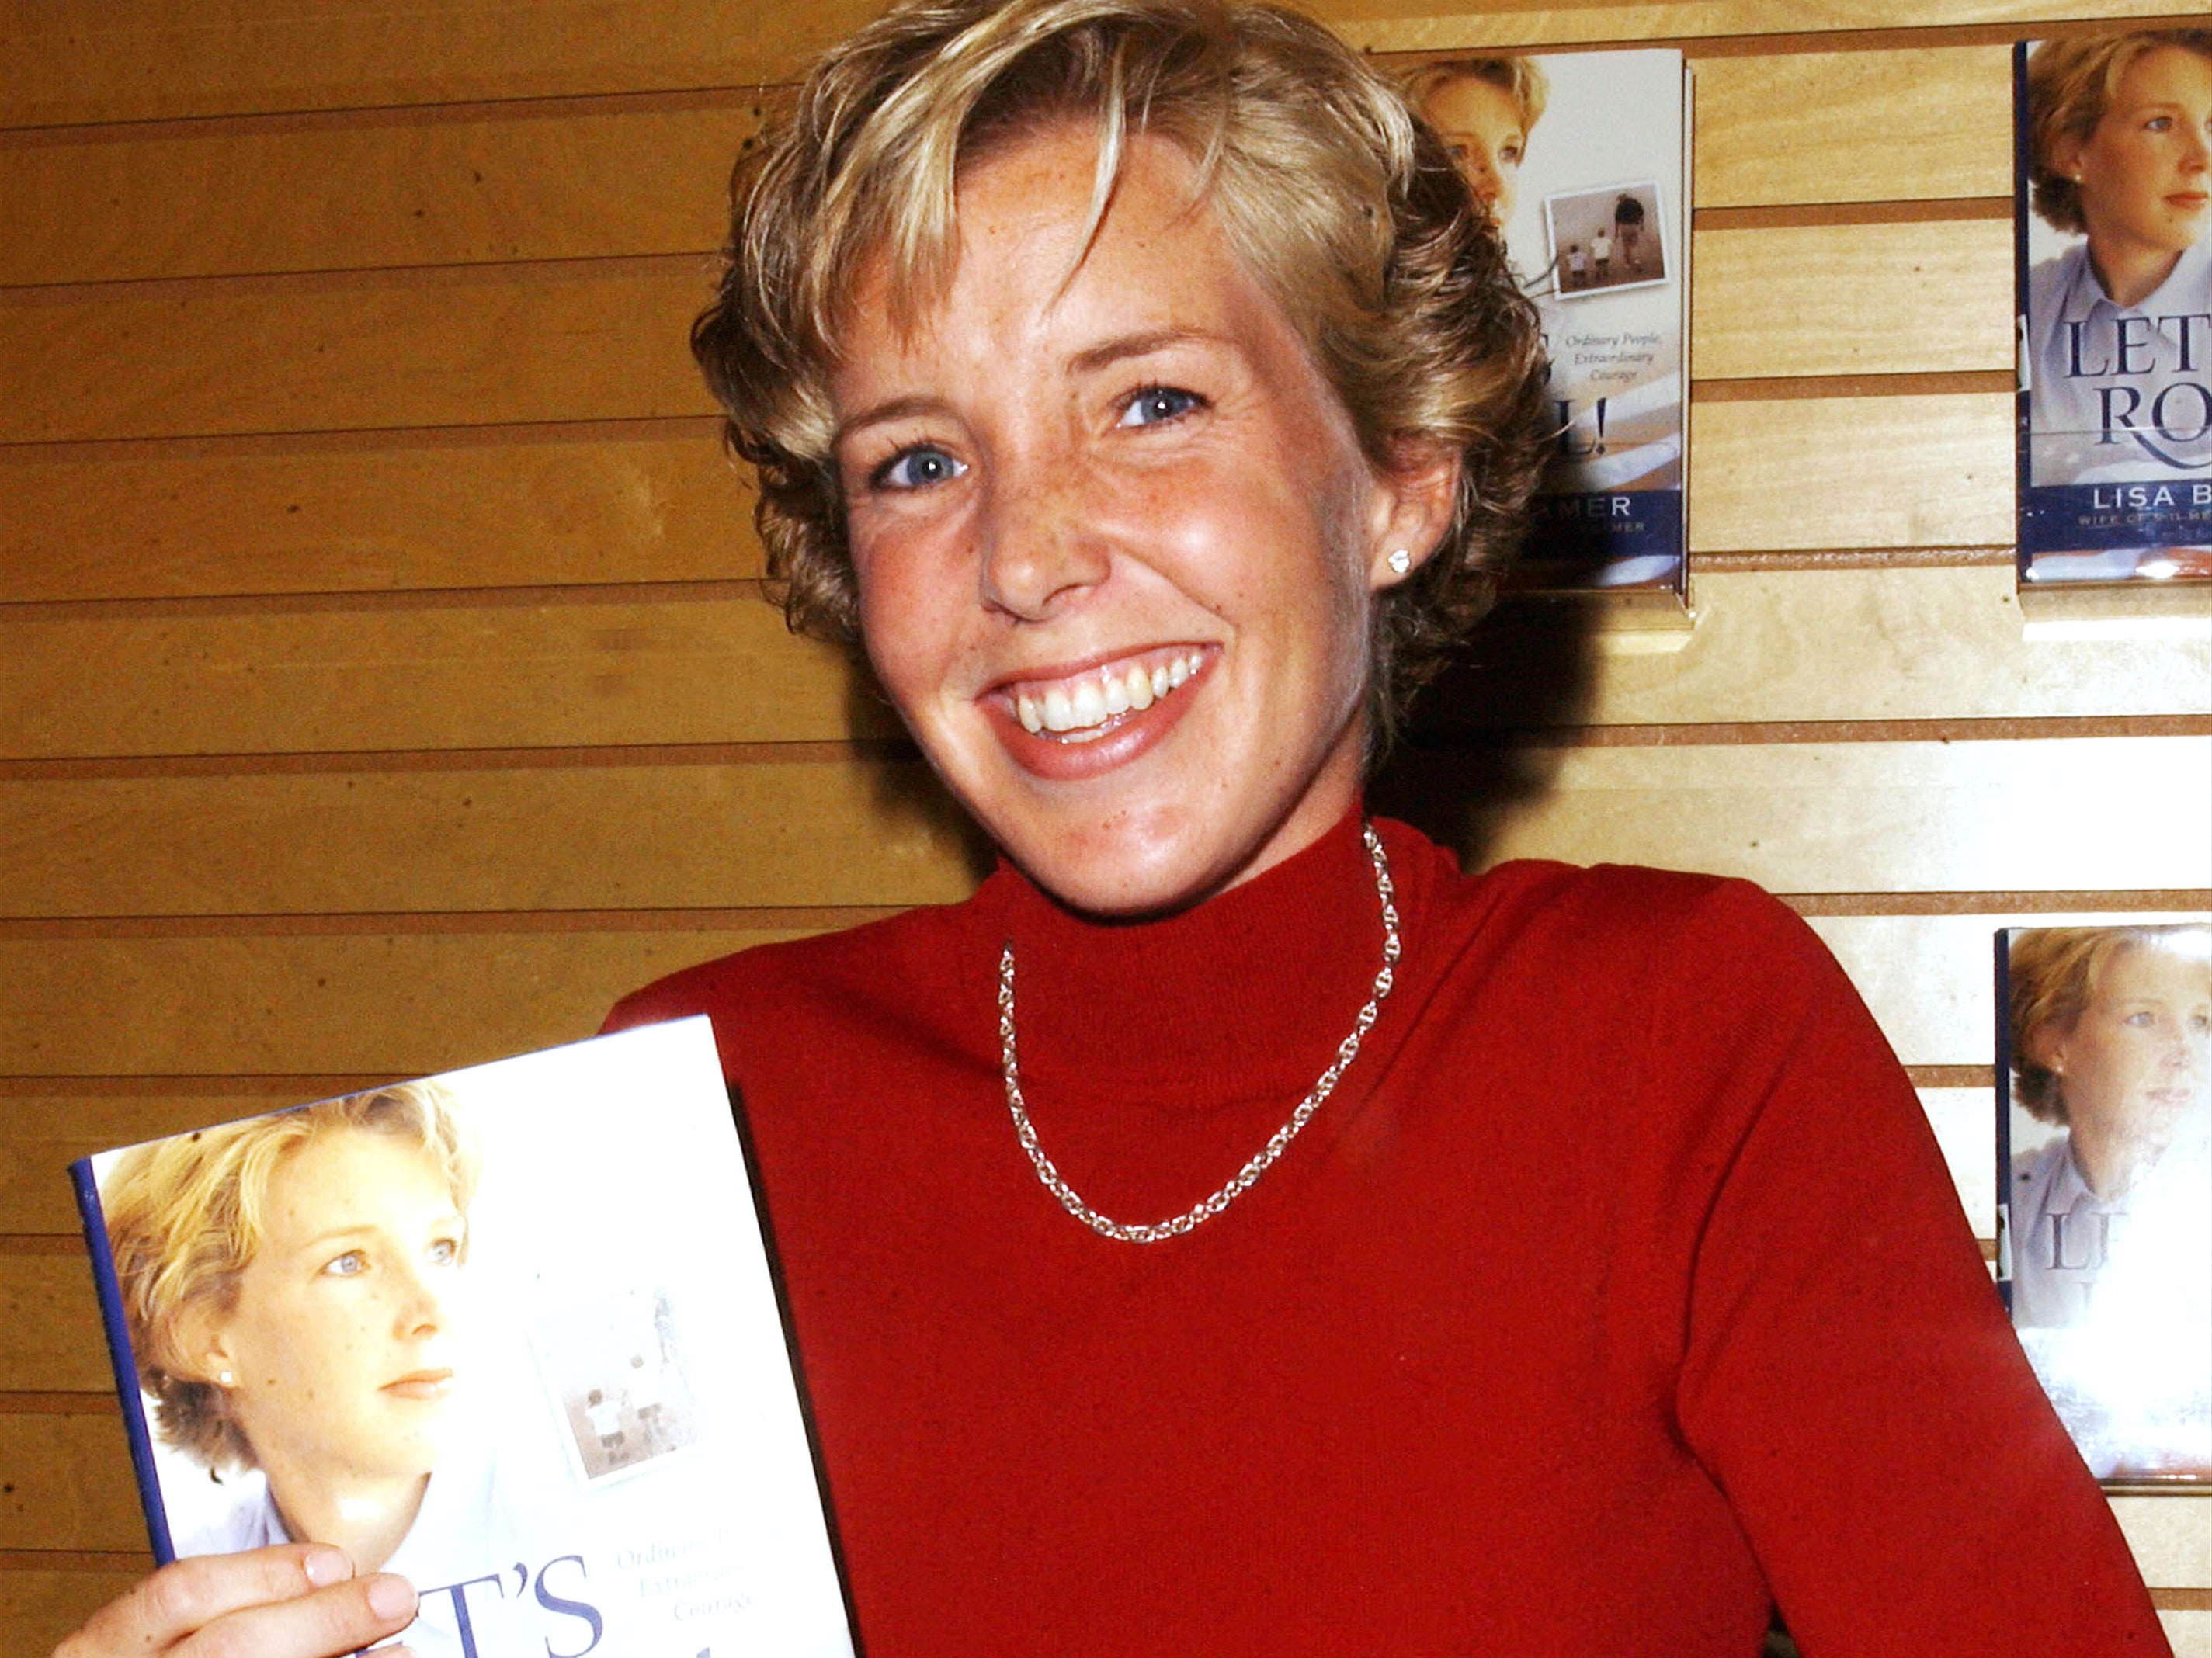 Widow Lisa Beamer poses for a photograph prior to signing copies of her new book "Let's Roll: Finding hope in the midst of crisis" at Barnes & Noble, Westside Pavilion on August 21, 2002